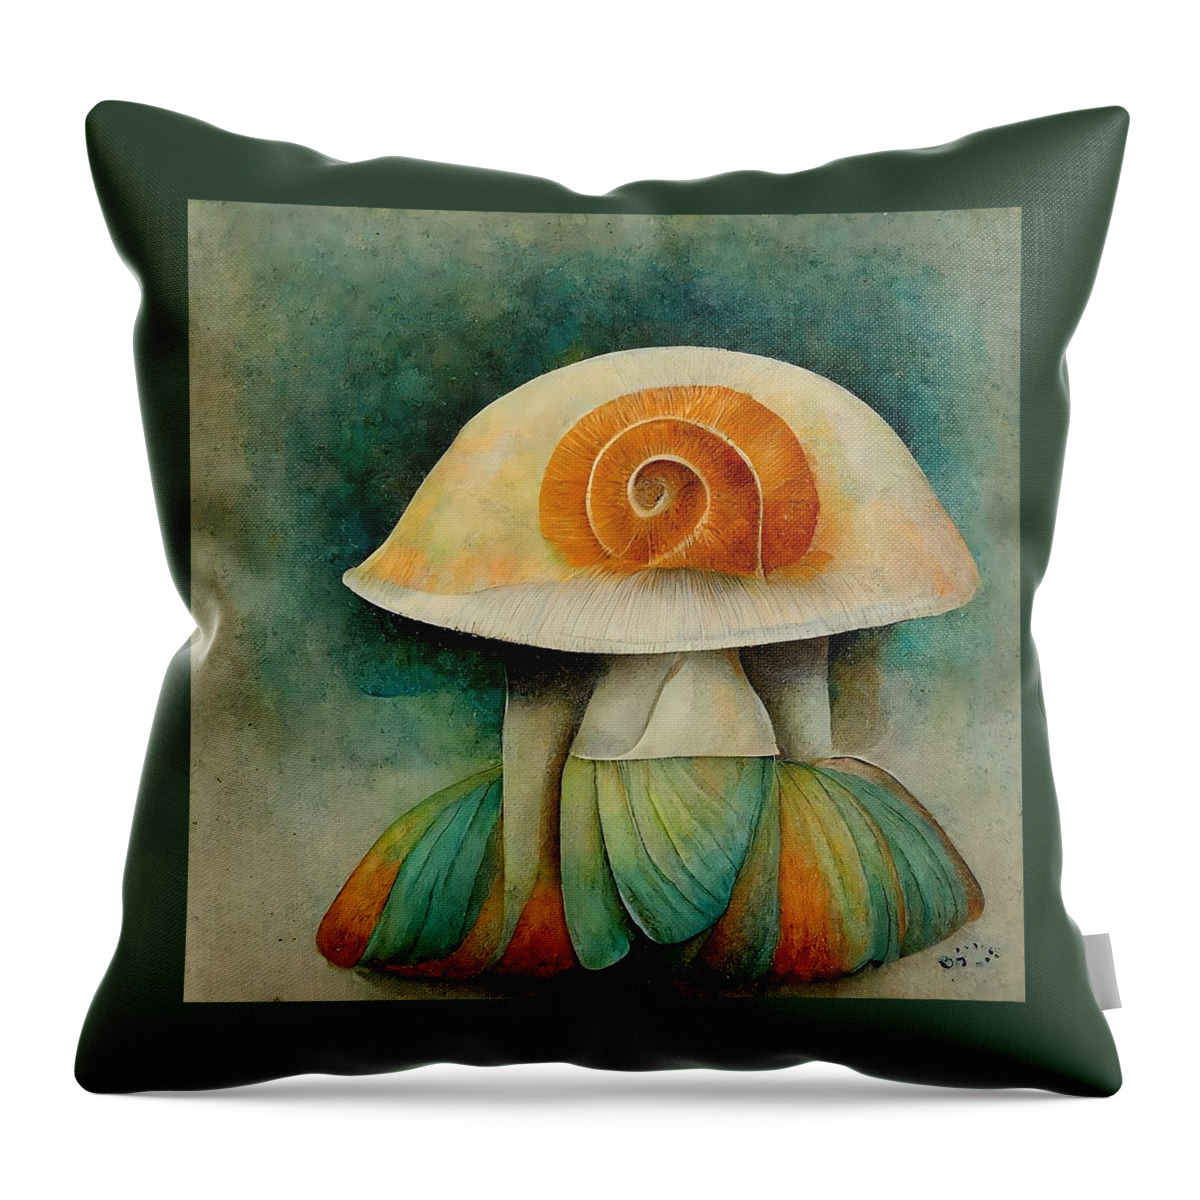 Mushroom Throw Pillow featuring the digital art Bell Bottomed Shroom by Vicki Noble